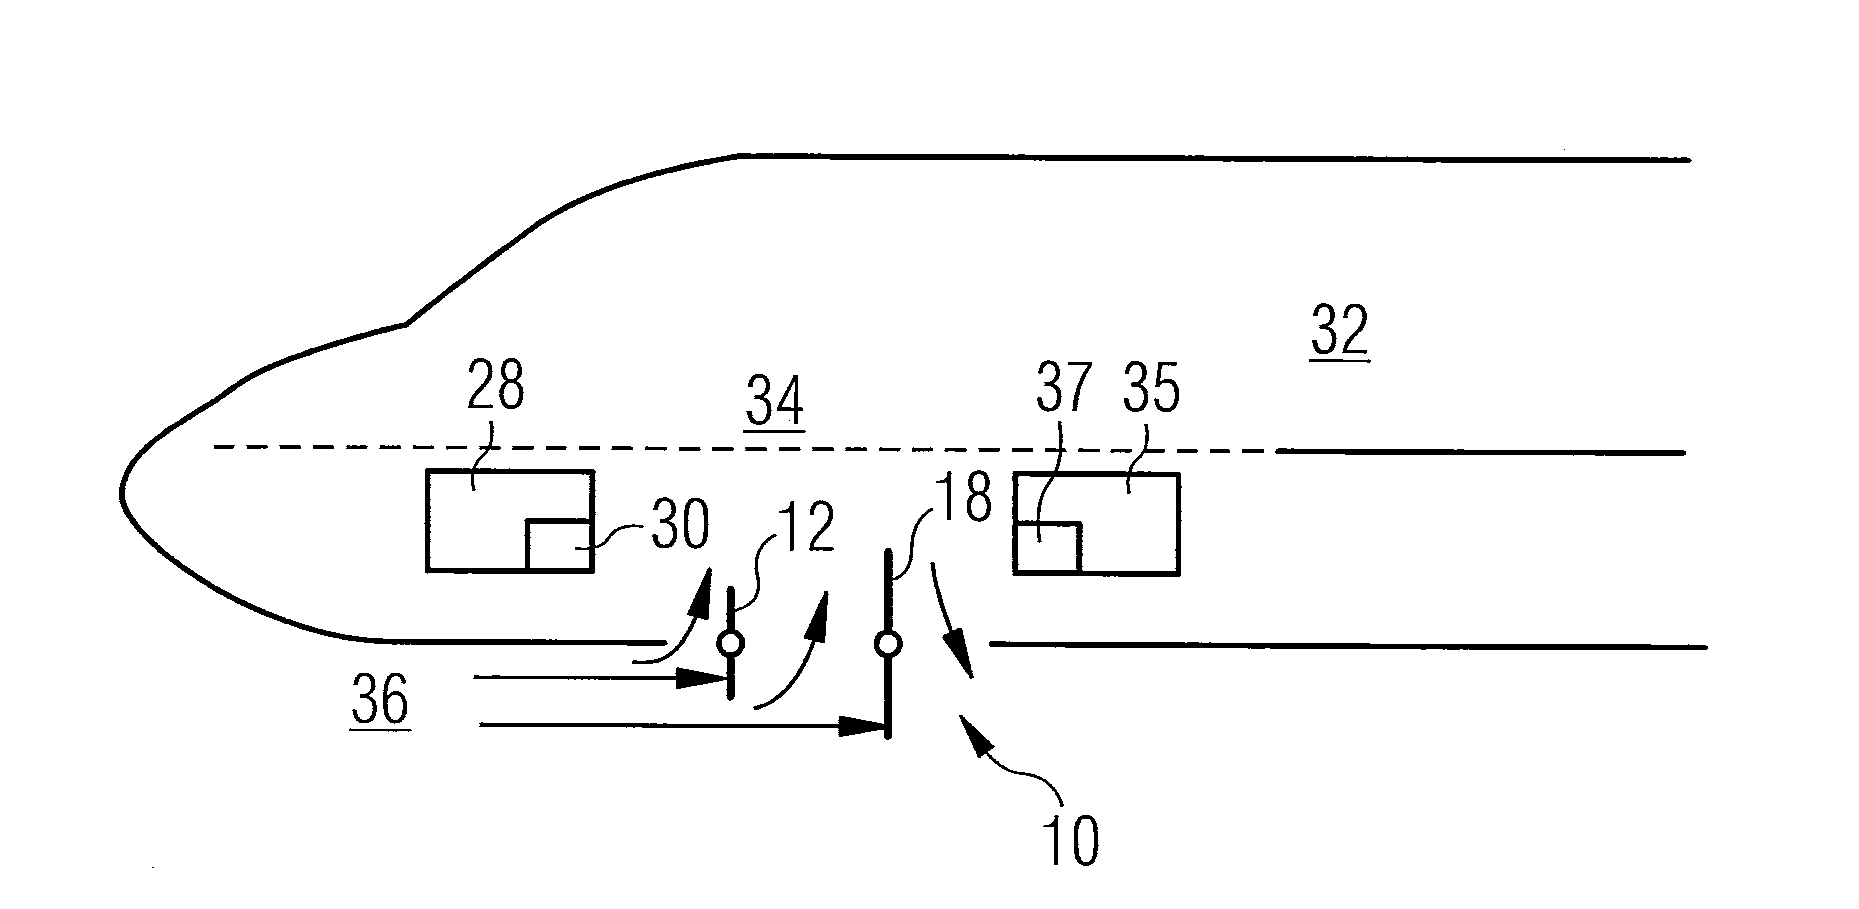 Air Outlet Valve As Well As a System and Method for Emergency Ventilation of An Aircraft Cabin